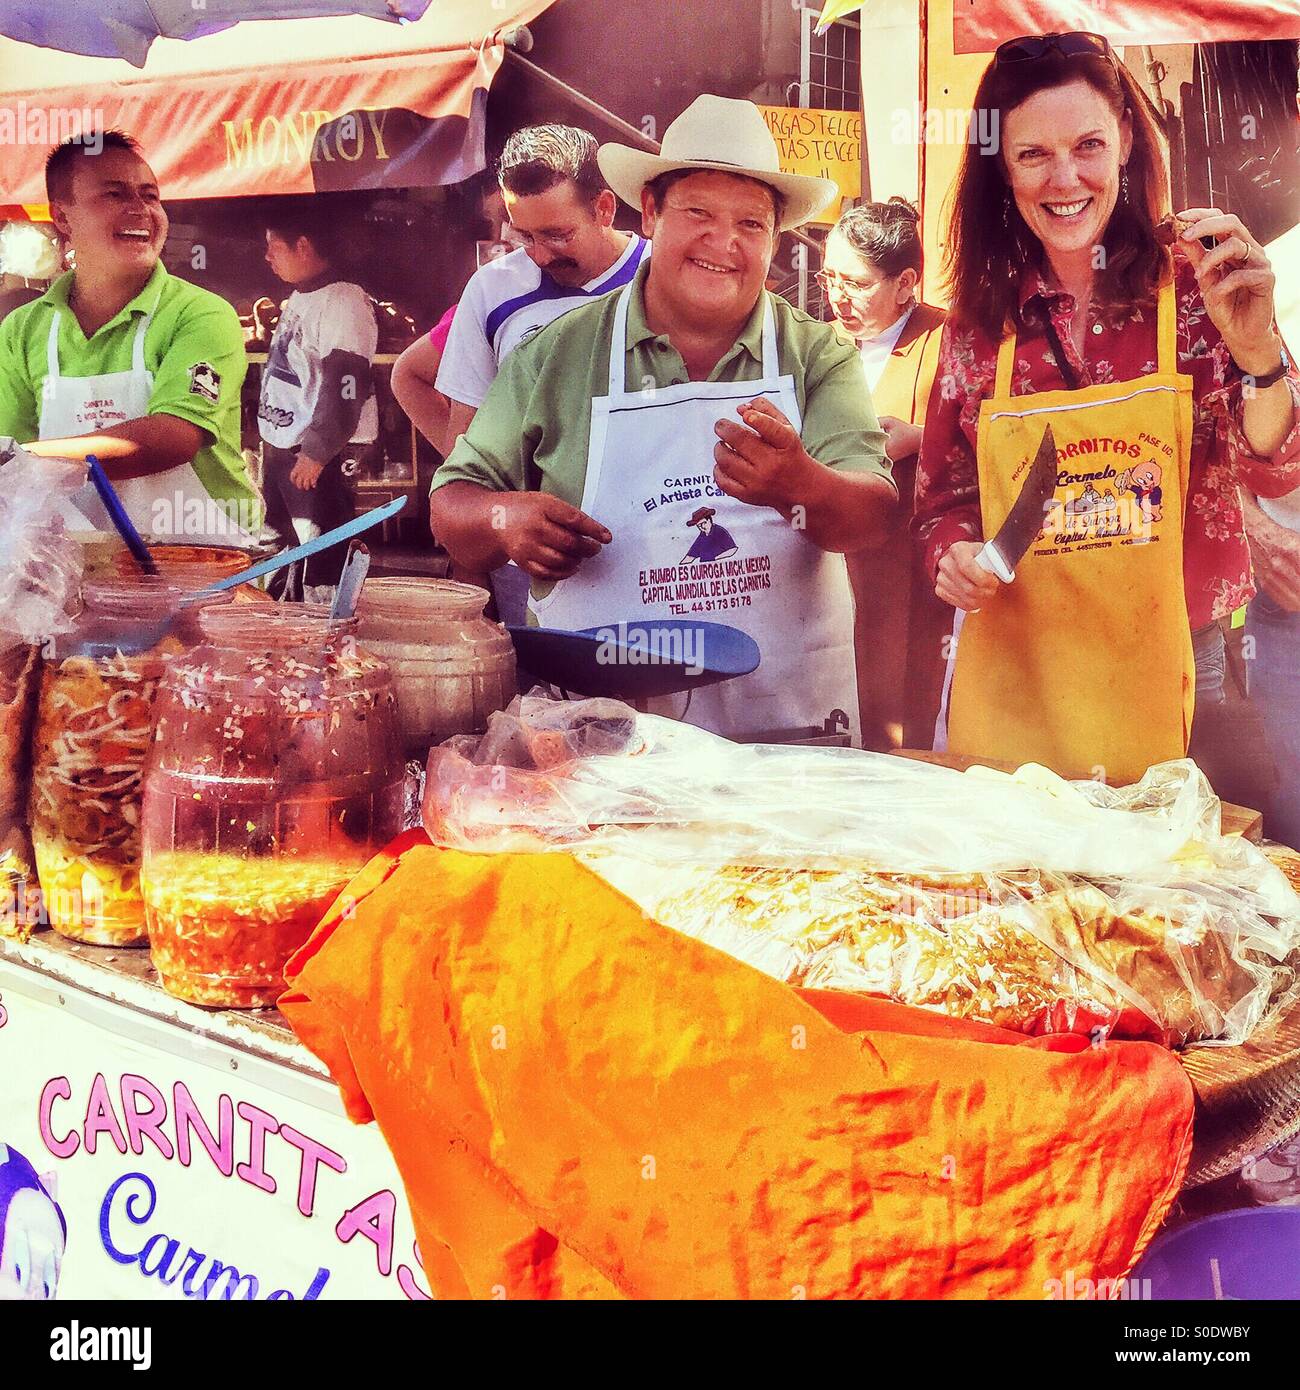 A happy tourist enjoys some hands on fun at a carnitas street vendors stand in Quiroga, Michoacan. Stock Photo